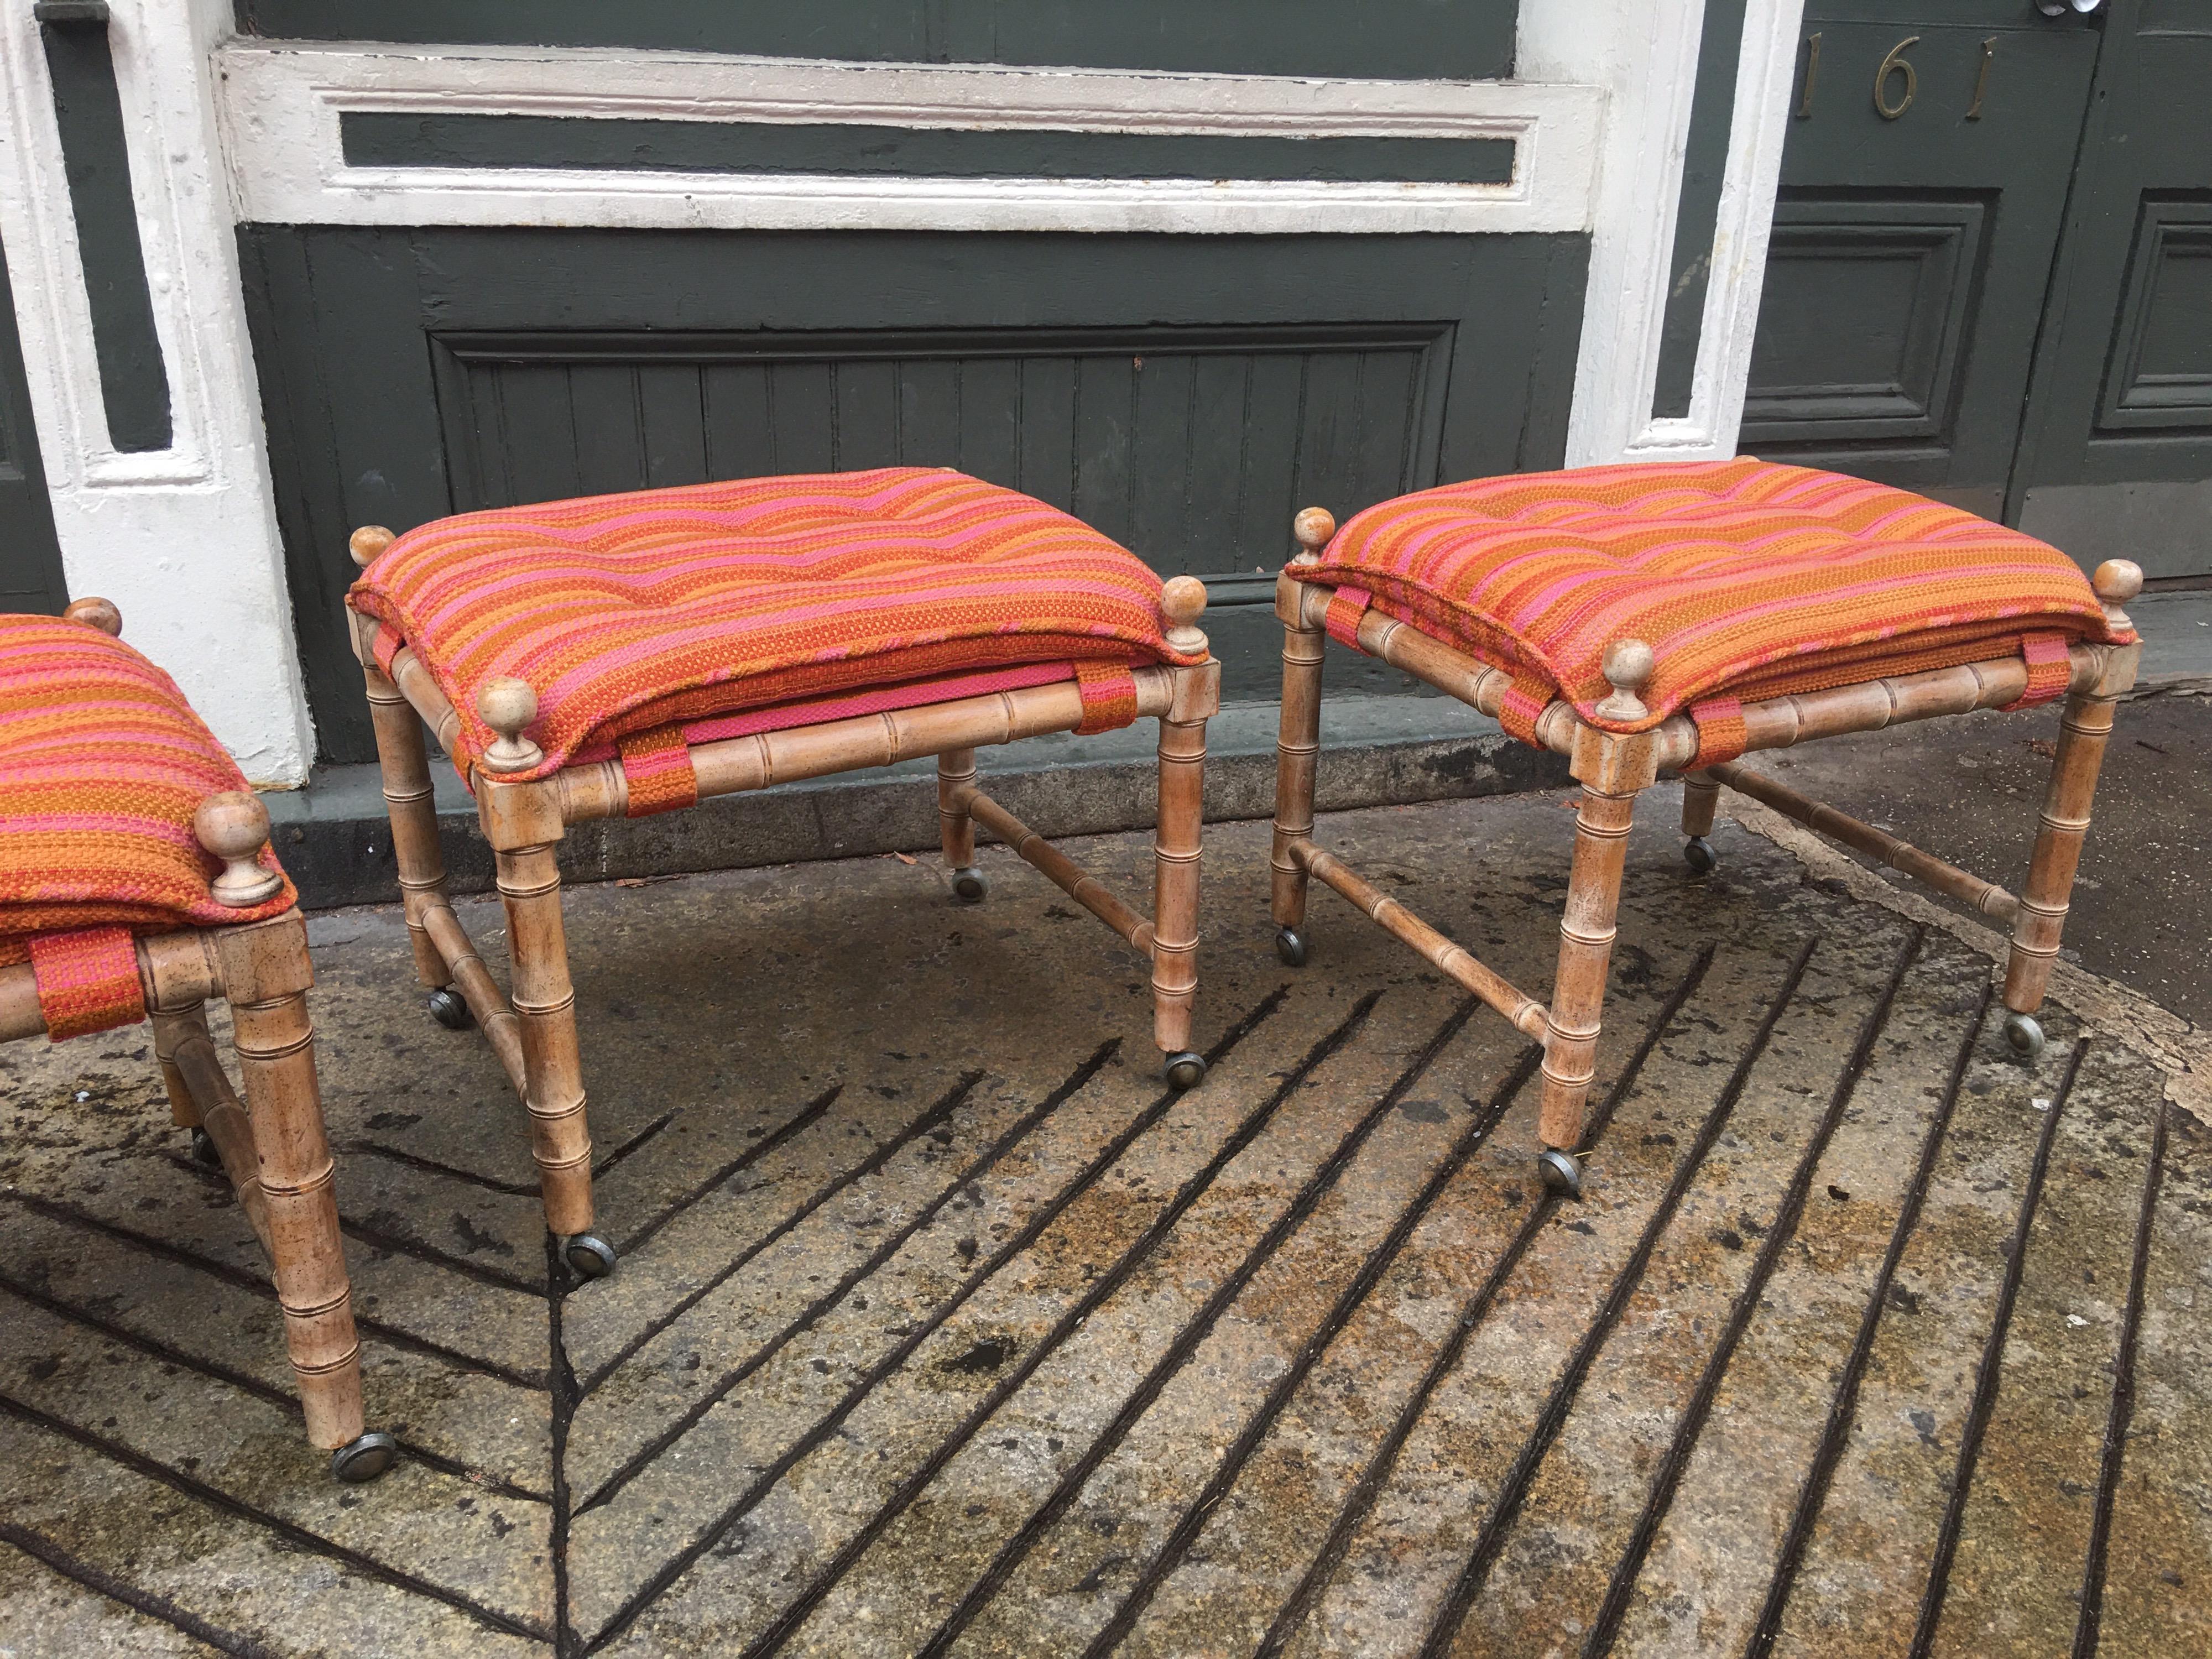 Set of 3 faux bamboo wood stools on wheels. Original Fabric shows wear. We can assist with reupholstering the set. Wood has a slight white wash finish over a light walnut.